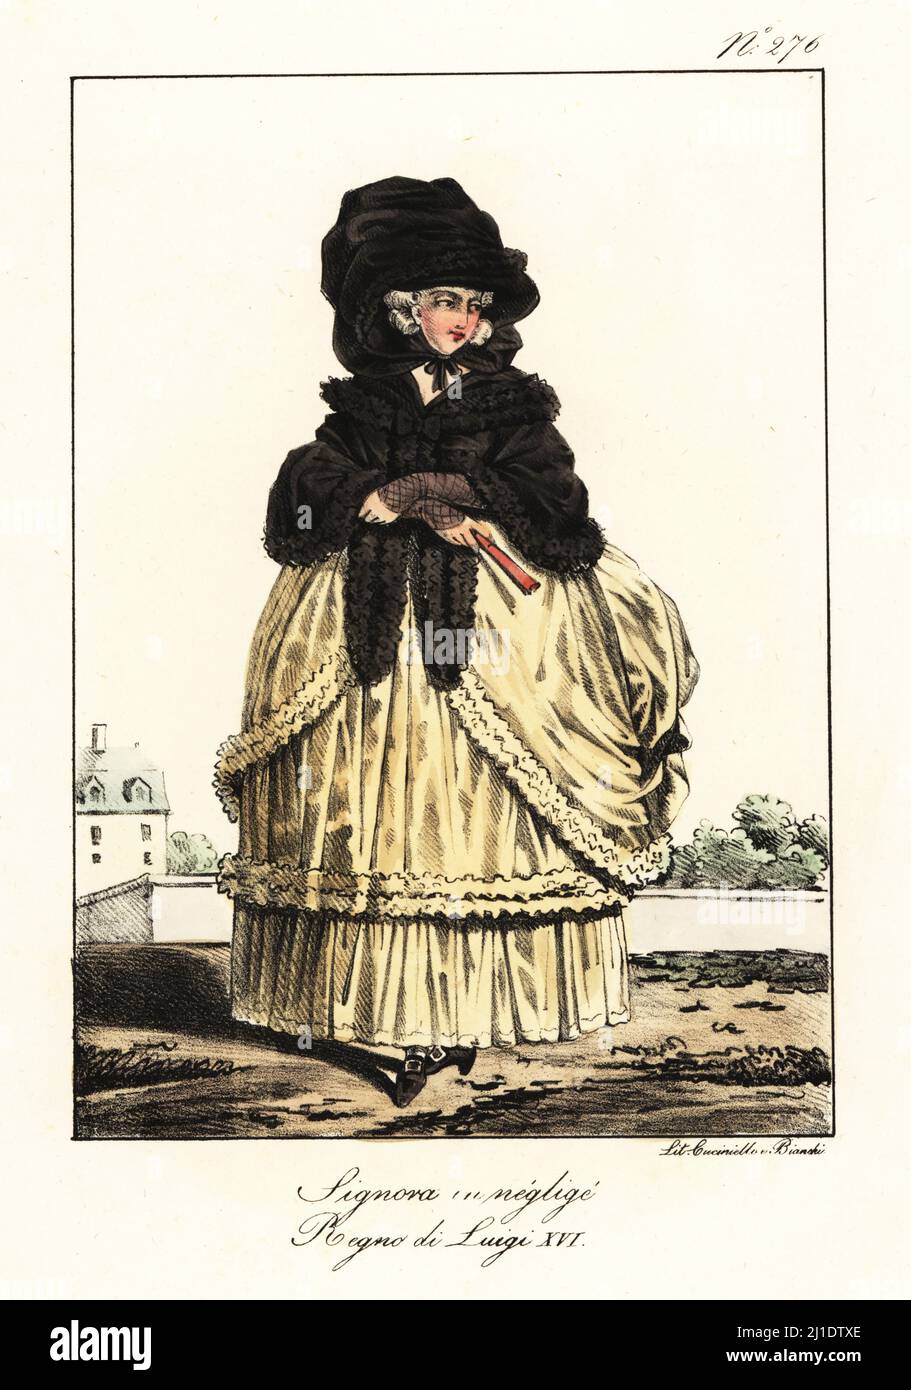 French woman in casual outfit, reign of King Louis XVI, late 18th century. Large black bonnet and lace shawl over a hoopskirt with frills and ruches. Dame en neglige. Regne de Louis XVI. Handcoloured lithograph by Lorenzo Bianchi and Domenico Cuciniello after Hippolyte Lecomte from Costumi civili e militari della monarchia francese dal 1200 al 1820, Naples, 1825. Italian edition of Lecomte’s Civilian and military costumes of the French monarchy from 1200 to 1820. Stock Photo